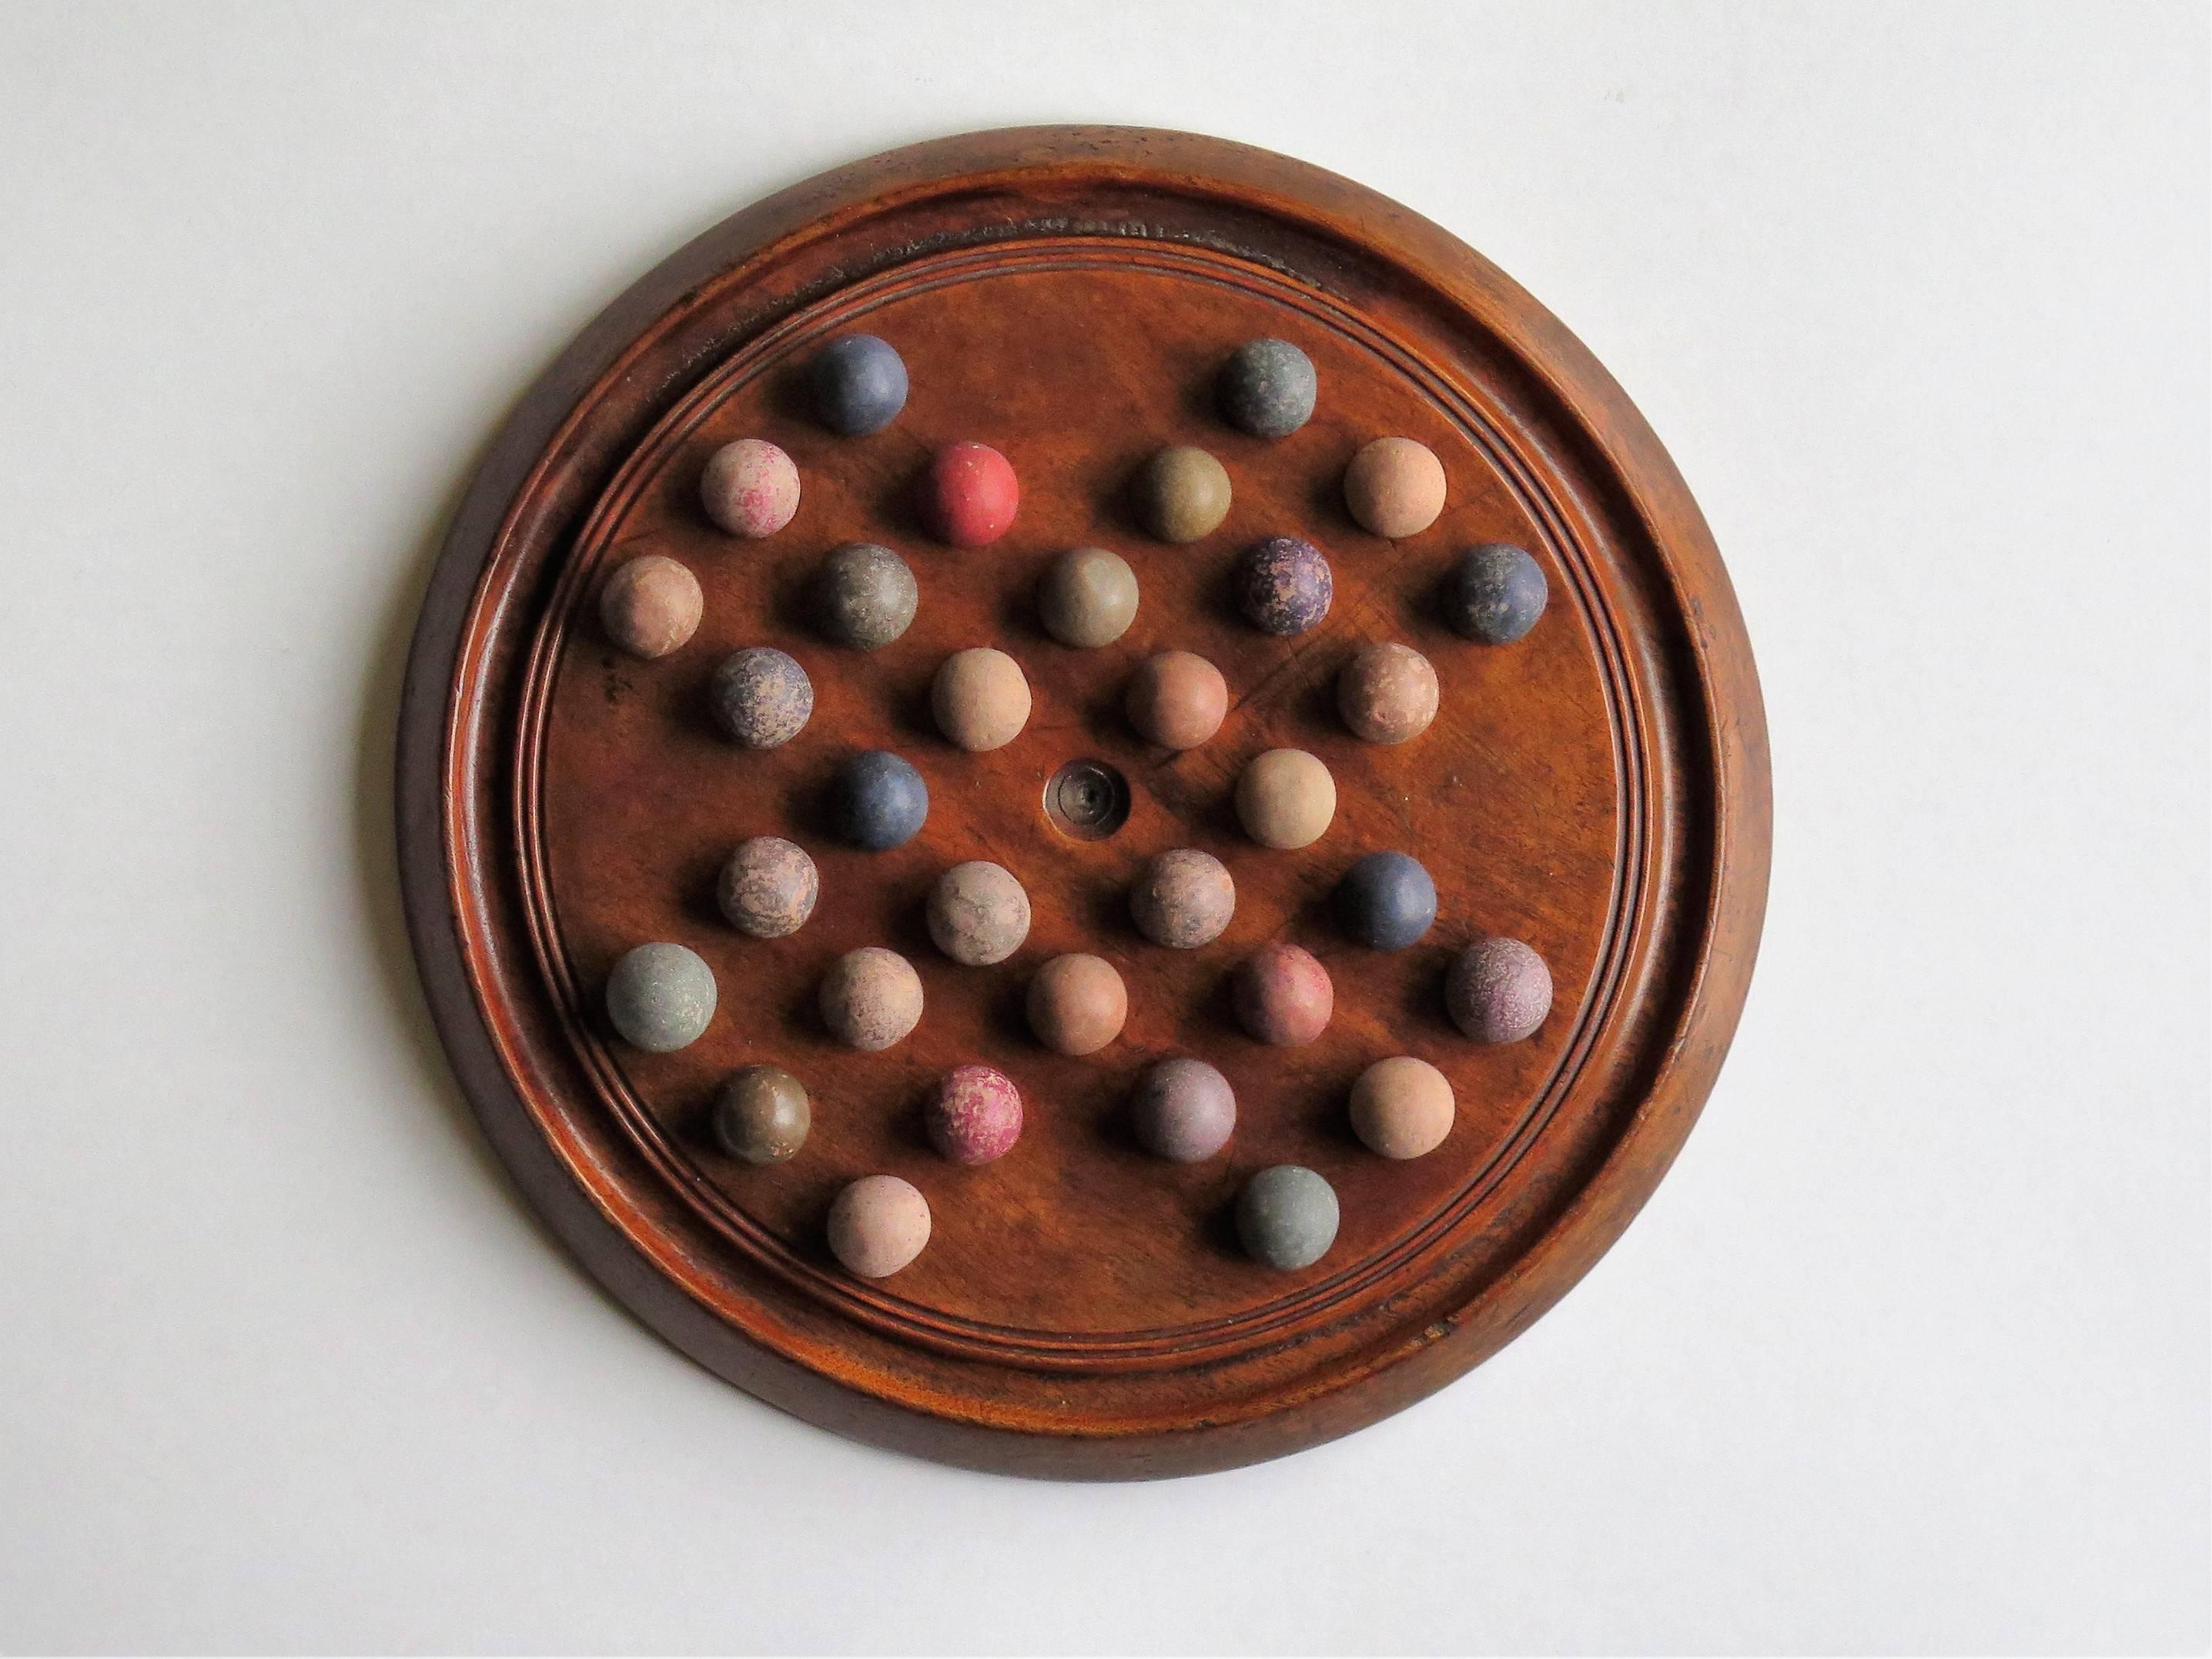 This is an original and complete game of marble solitaire from the mid-19th century or possibly earlier.

The circular turned board is made of mahogany and has developed a lovely color and patina through years of use. The board has 32 equi-spaced